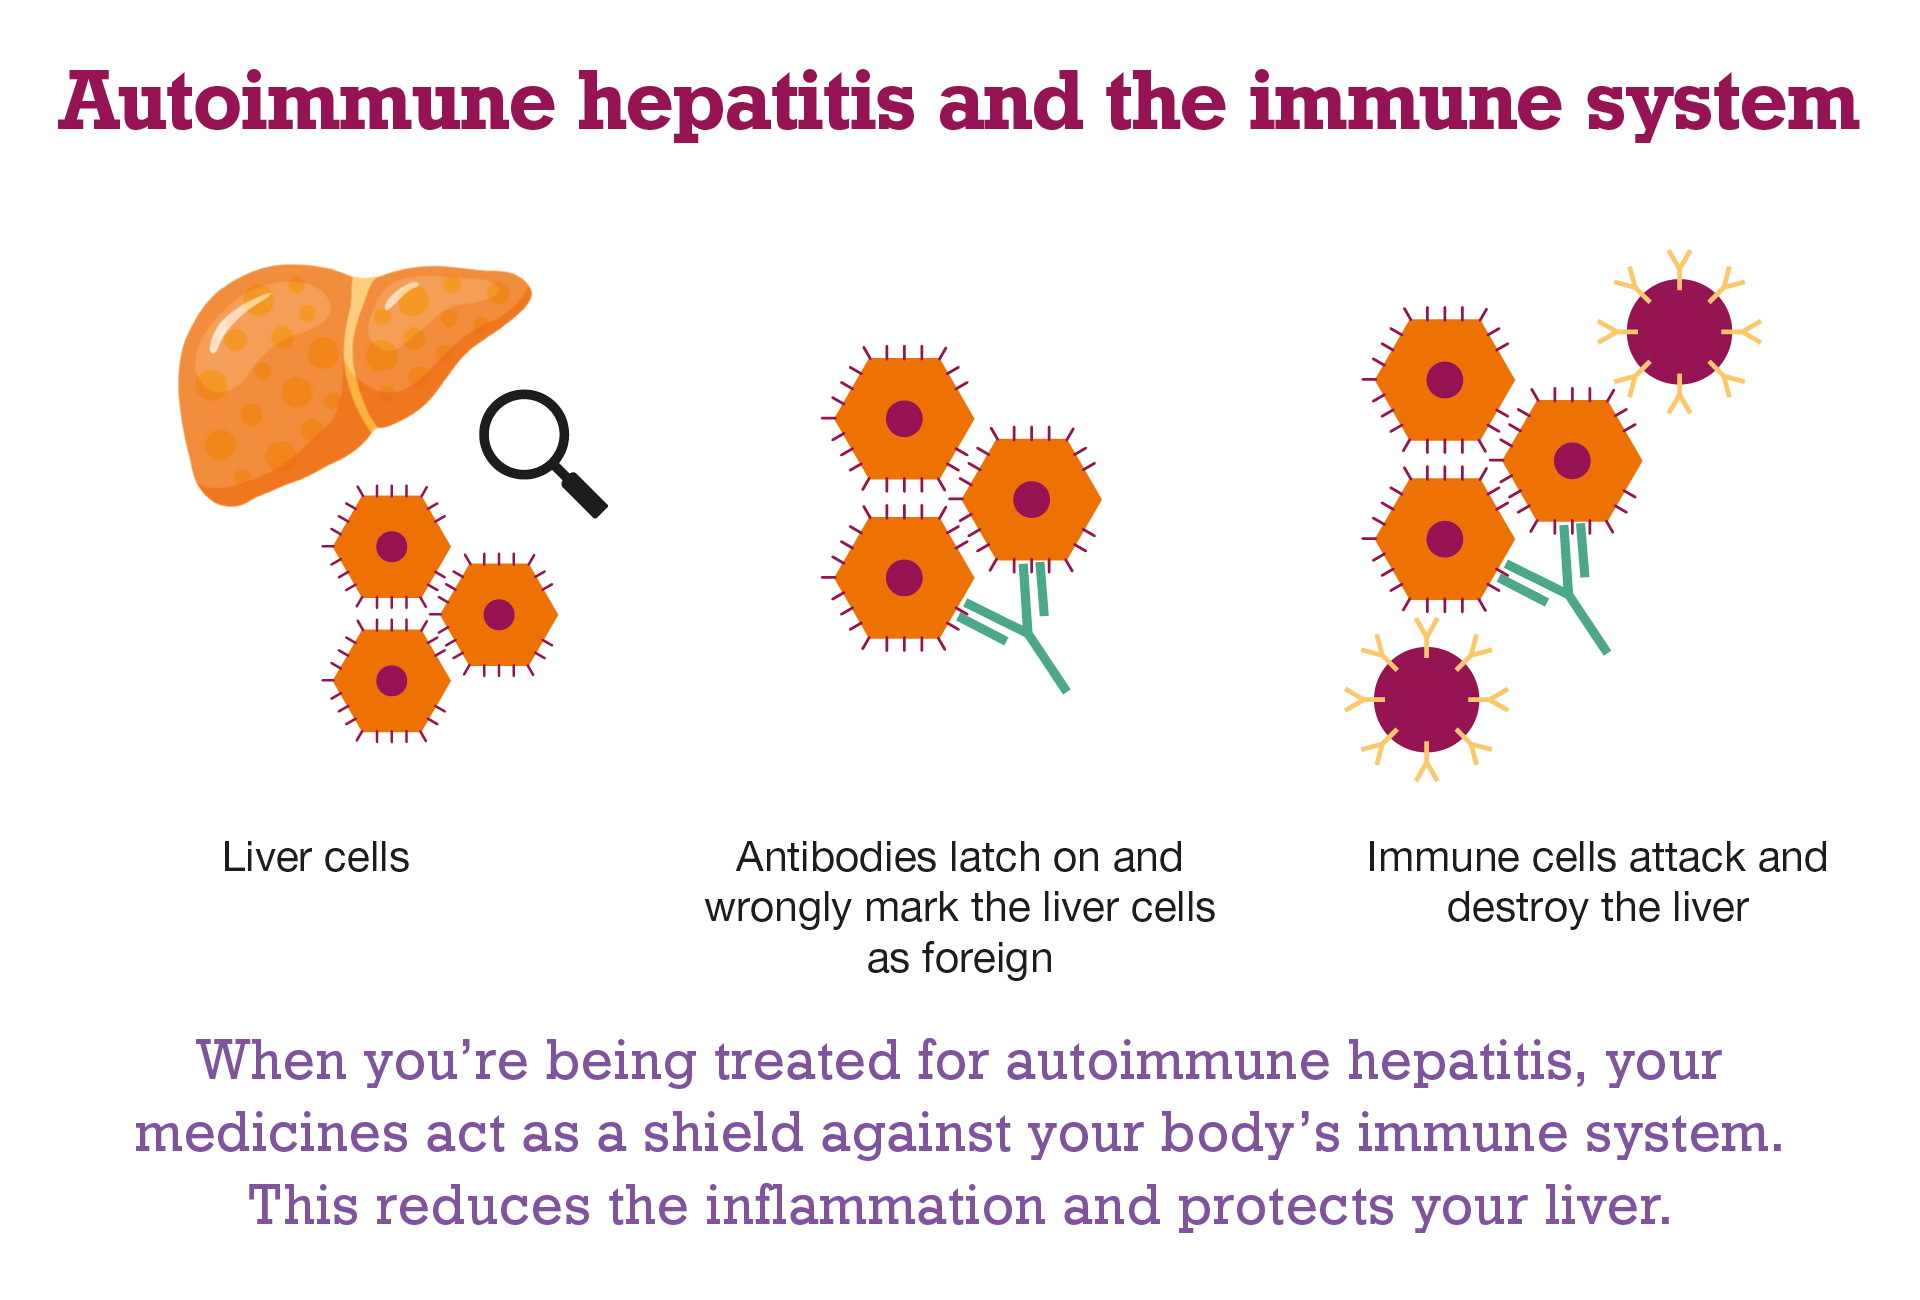 Image title is: autoimmune hepatitis and the immune system. Under this are 3 diagrams. The first shows a liver and 3 representations of liver cells, a magnifying glass shows that these cells are being shown enlarged compared to the liver. The cells are shown as orange hexagons with a dot in the middle and spikes on the outside. This diagram is labelled liver cells. The second diagram shows 3 of the cells. A green Y shaped structure representing an antibody is stuck to the spikes on two of the cells. This diagram is labelled: antibodies latch on and wrongly mark the liver cells as foreign. The third diagram also has the image of the cells and antibody. In addition it has two circles, each with several yellow Y shaped structures sticking out of them. These circles represent immune cells. The label for this diagram says: immune cells attack and destroy the liver. Text under the three diagrams reads: When you're being treated for autoimmune hepatitis, your medicines act as a shield against your body's immune system. This reduces the inflammation and protects your liver. 